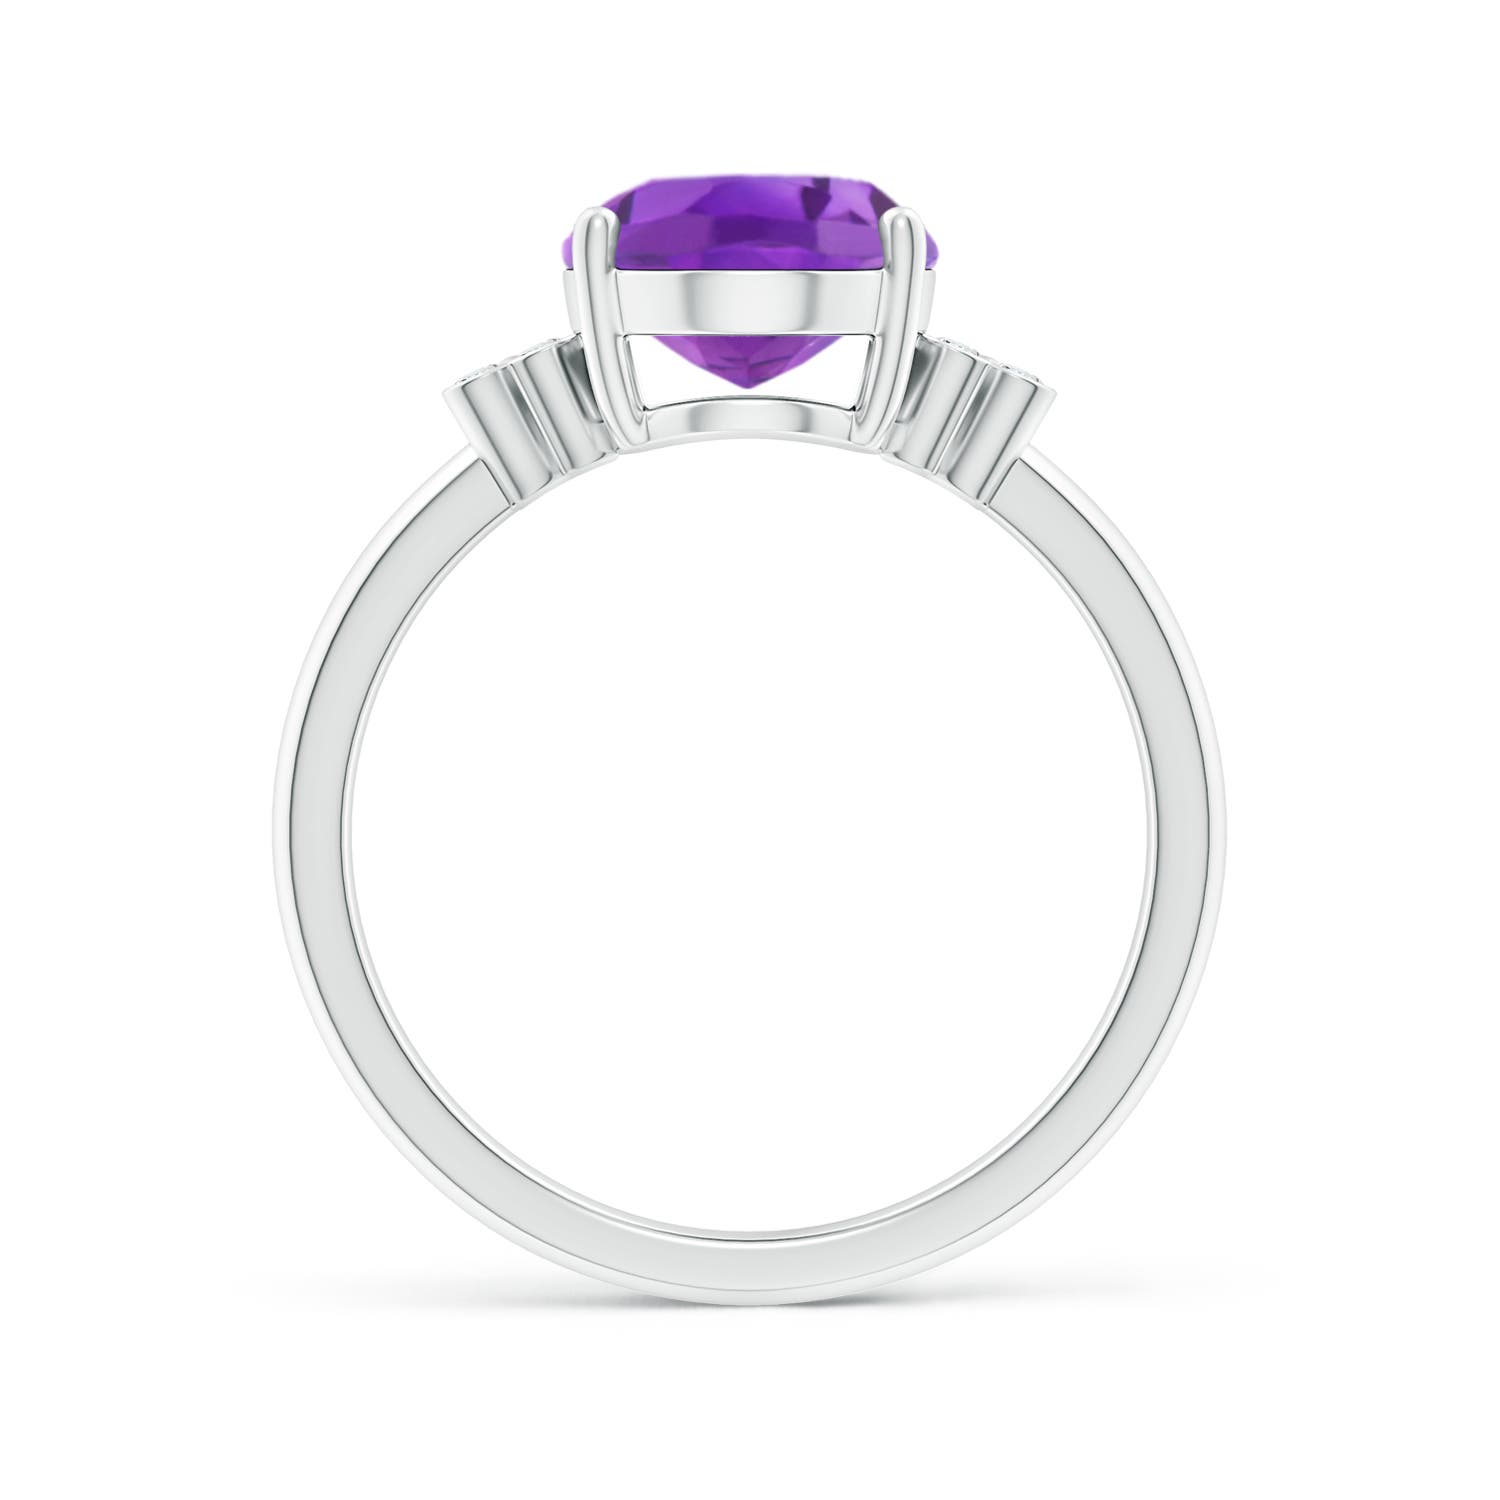 AA- Amethyst / 2.36 CT / 14 KT White Gold